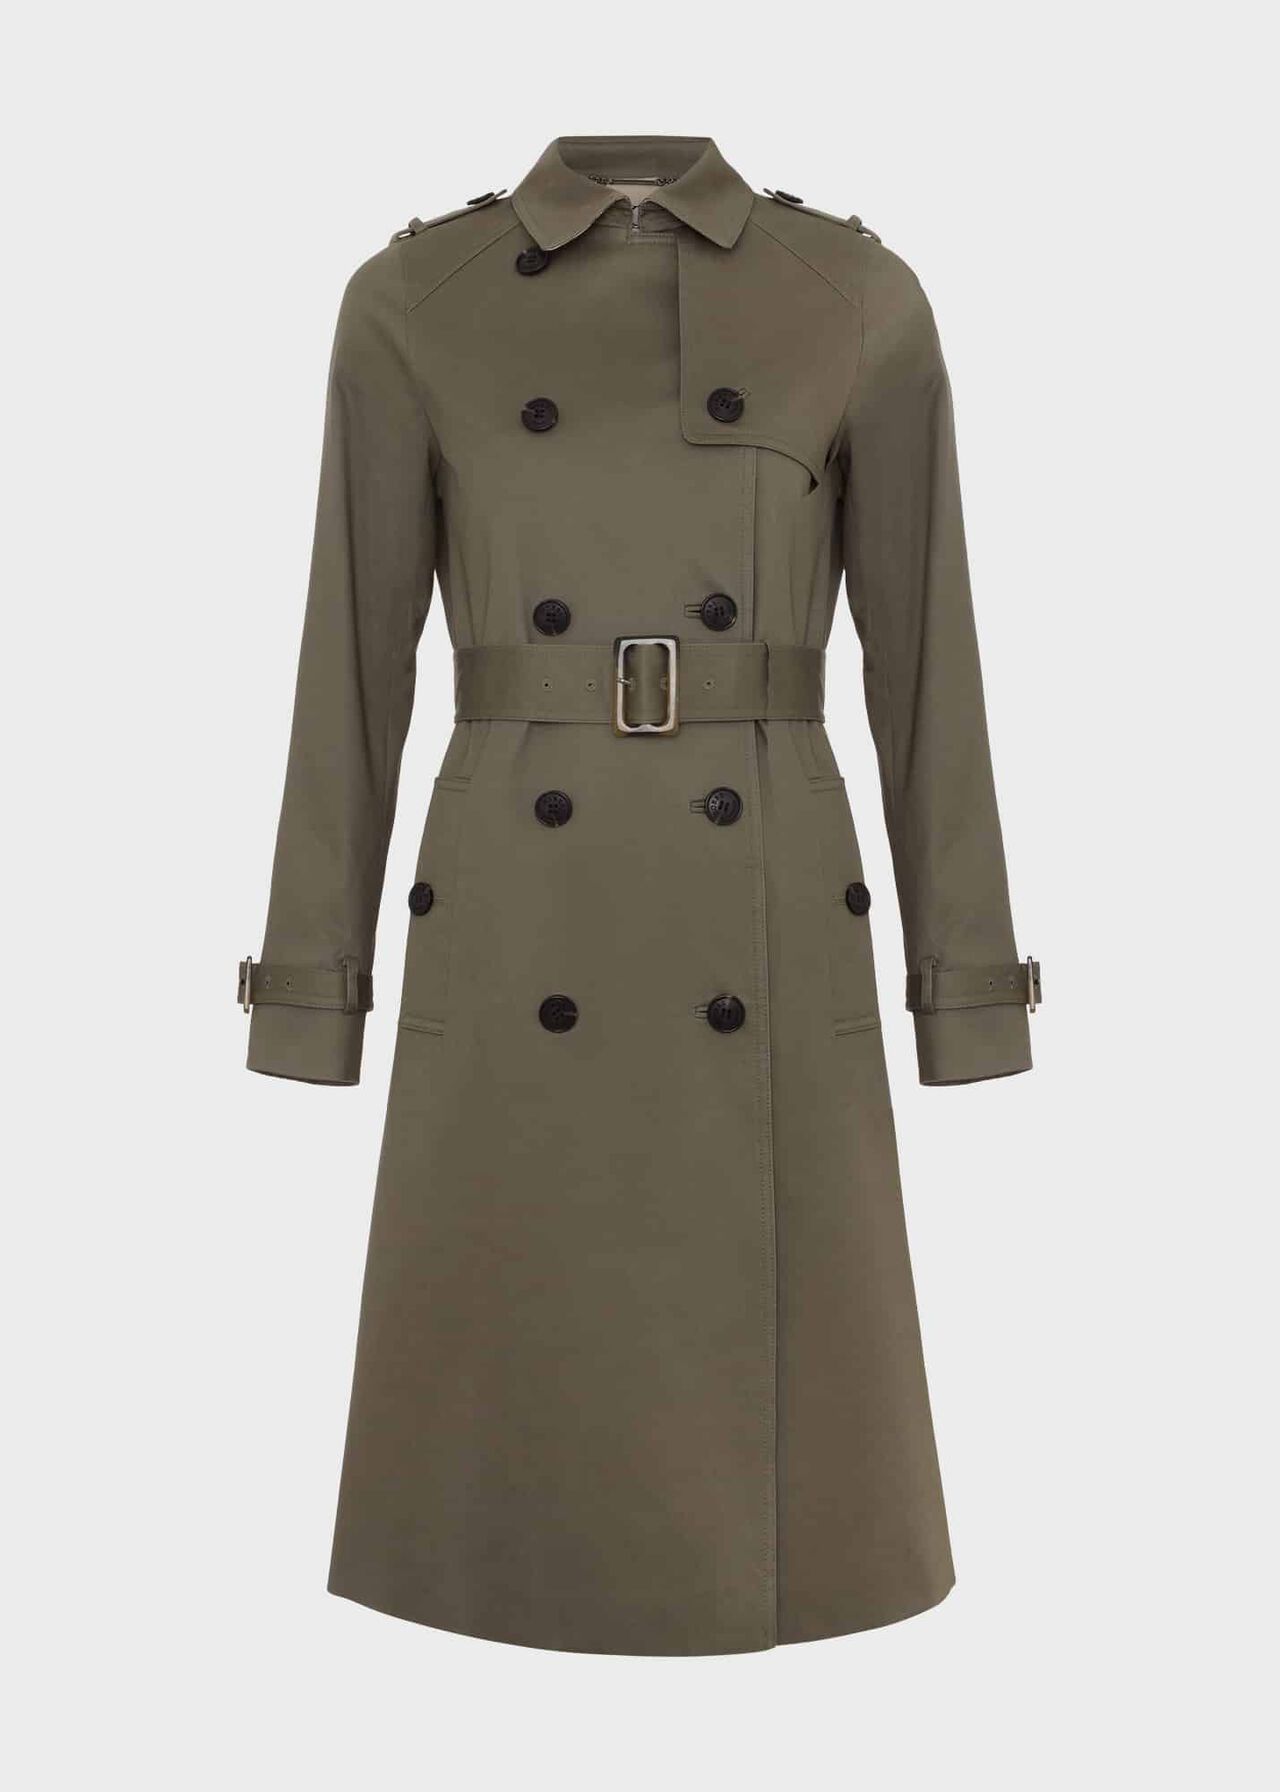 Lisa Trench Shower Resistant Trench Coat, Olive Green, hi-res